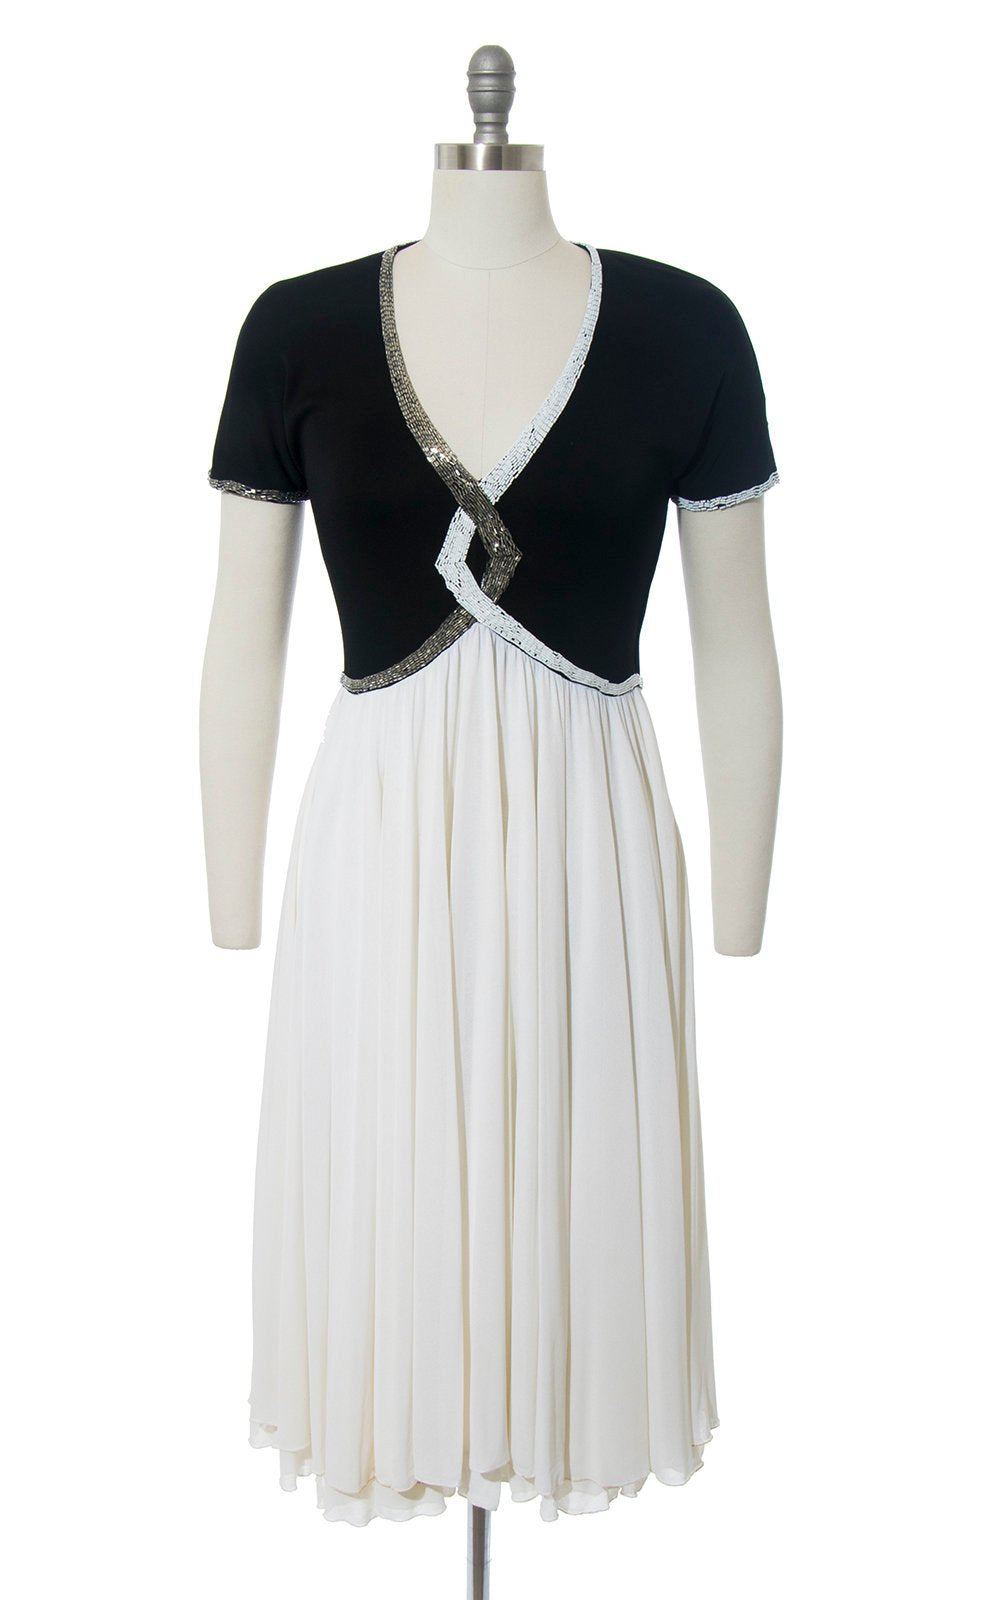 Vintage 1940s Style Dress | Beaded Jersey Knit Evening Gown Color Block Black White Party Dress (medium)